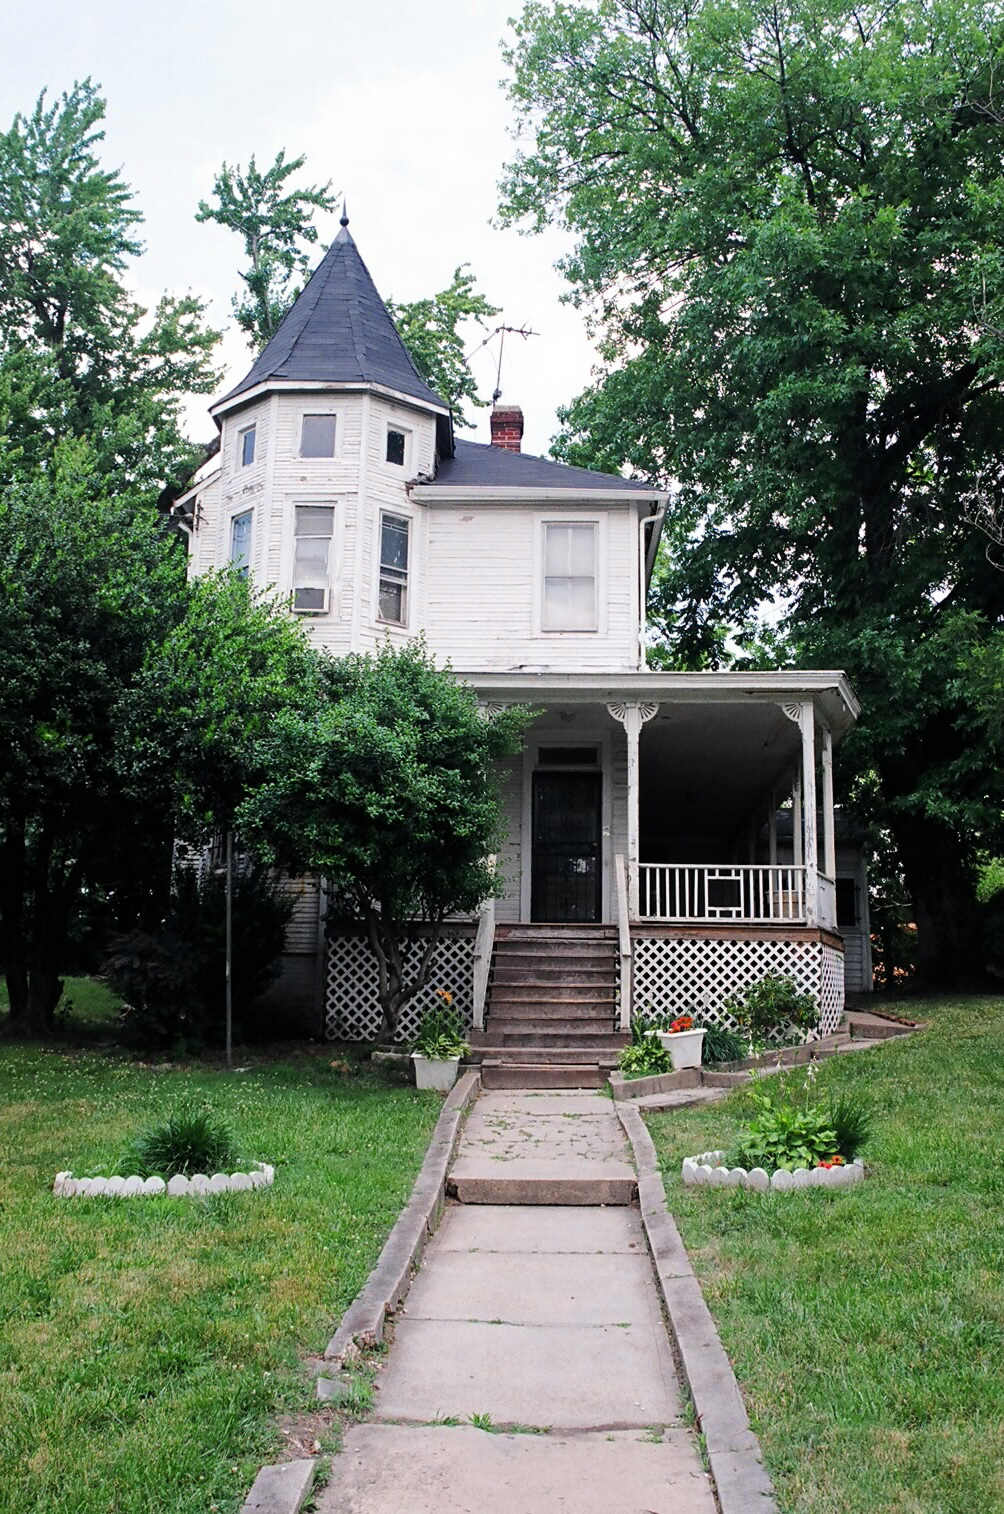 an old run down victorian style house with a front porch